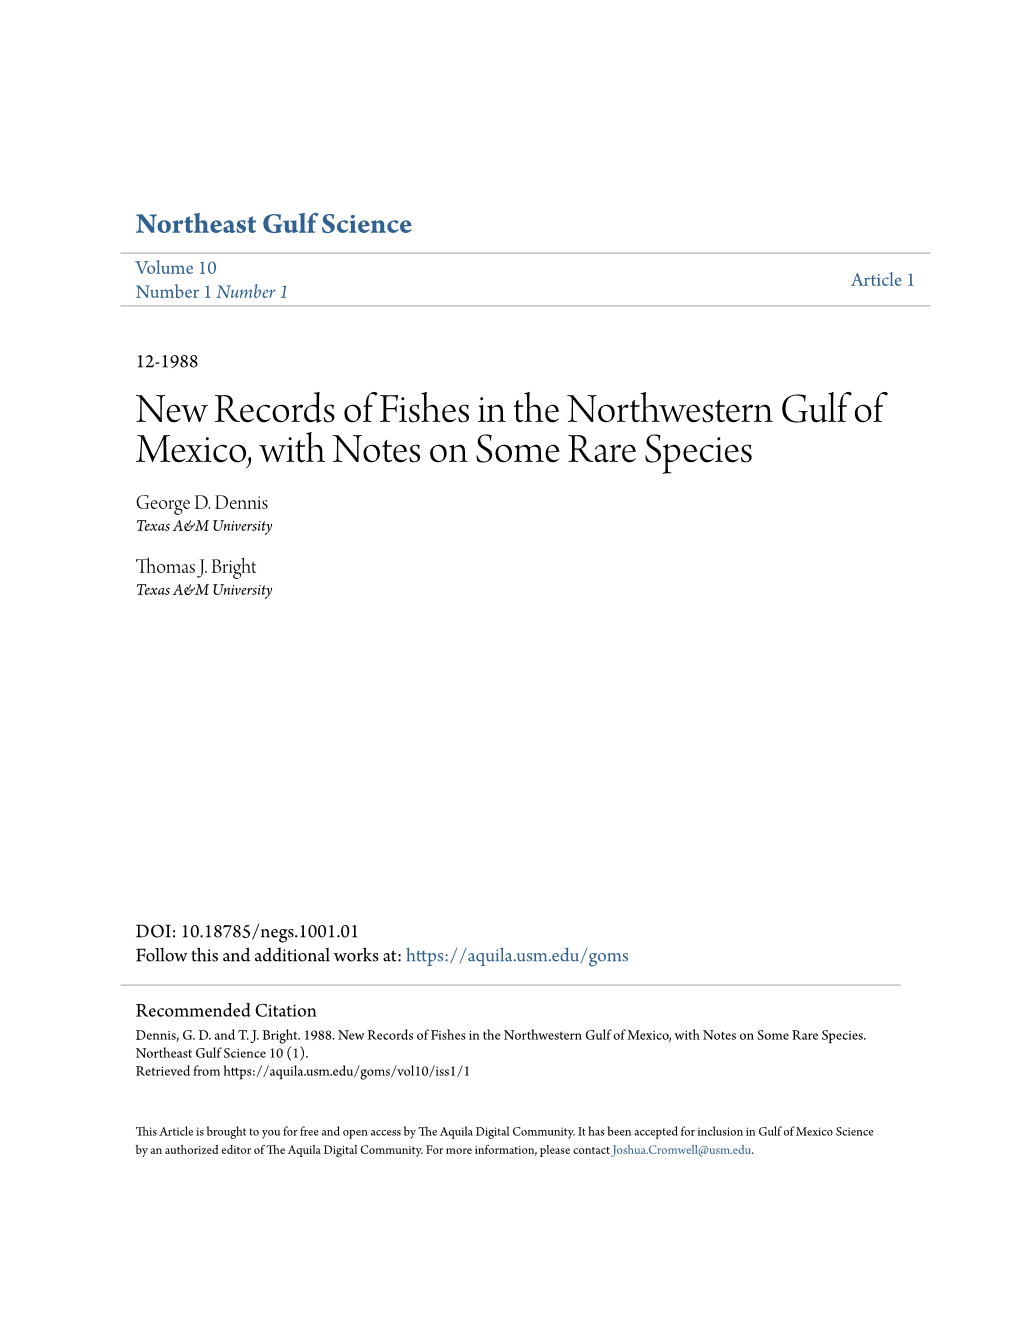 New Records of Fishes in the Northwestern Gulf of Mexico, with Notes on Some Rare Species George D